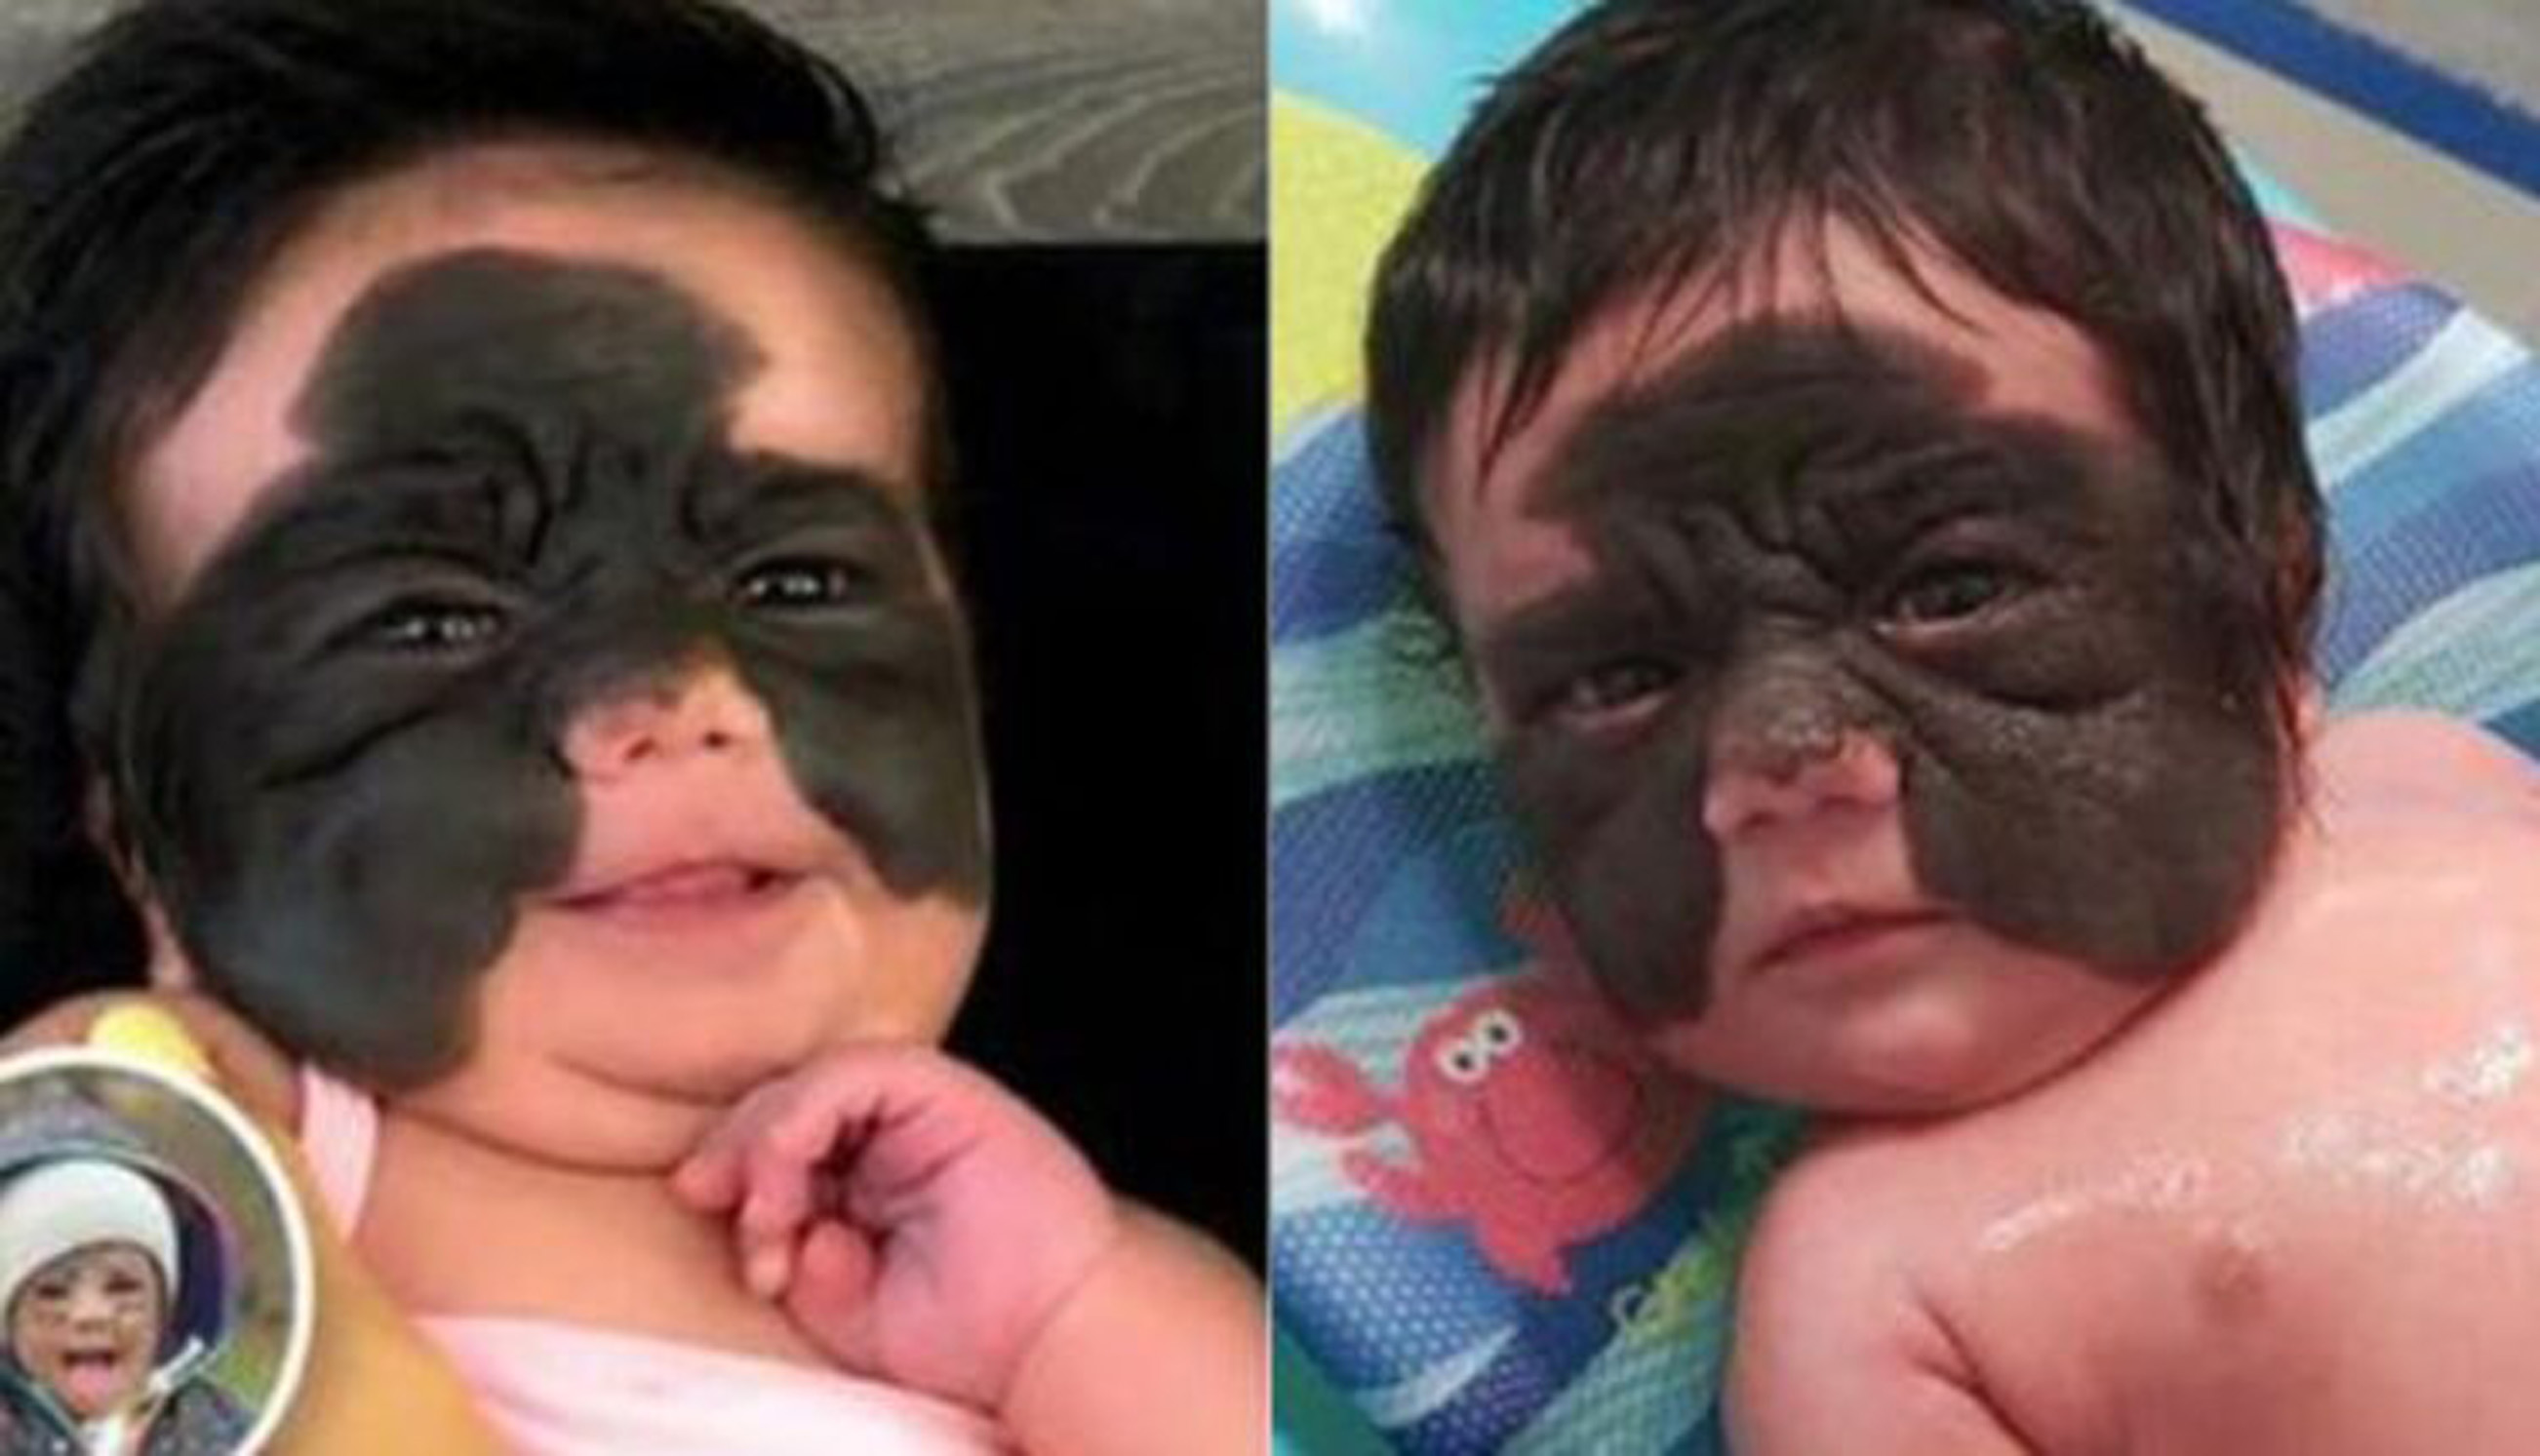 2-Year-Old Girl Finally Has ‘Batman’ Birthmark Removed After Pioneering Surgery